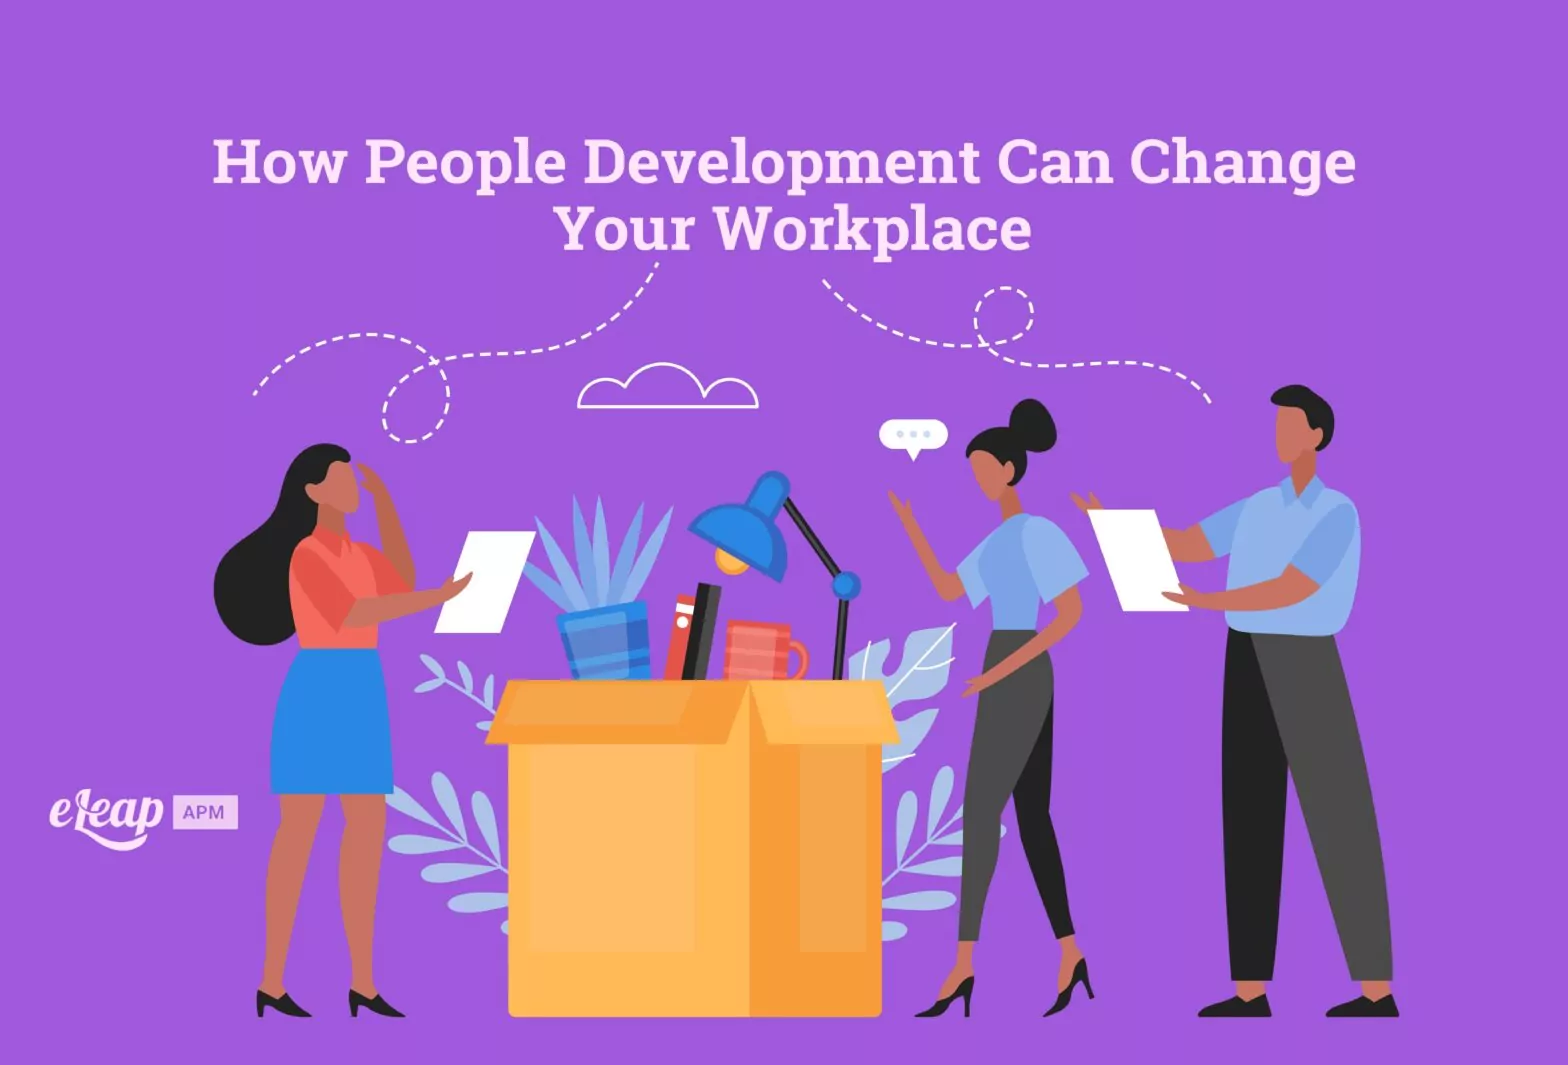 How People Development Can Change Your Workplace